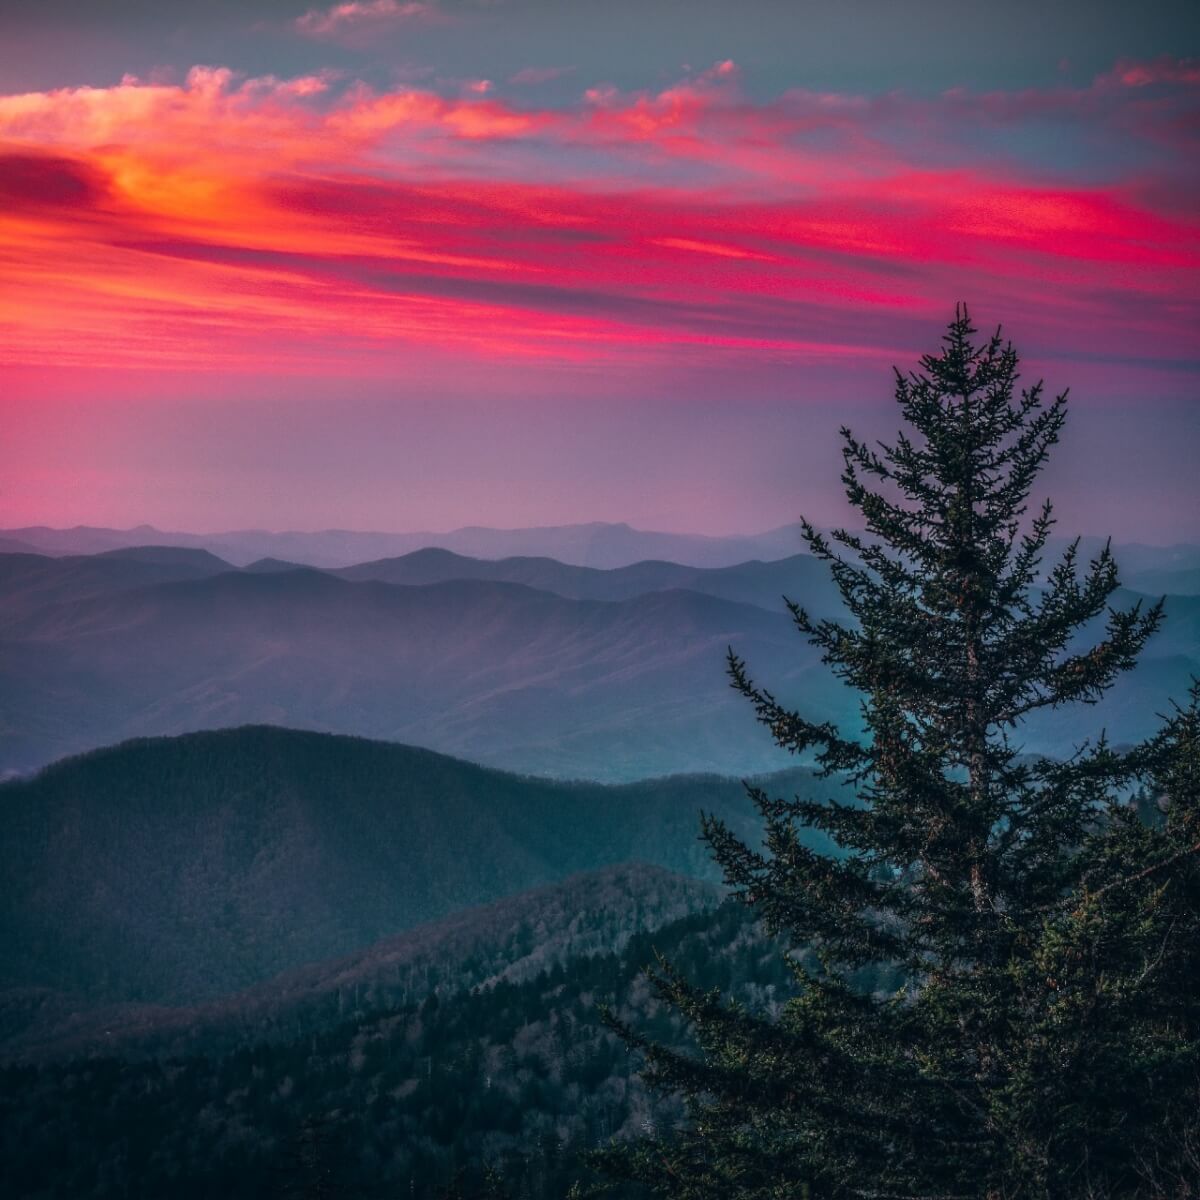 Sunset over the Great Smoky Mountains